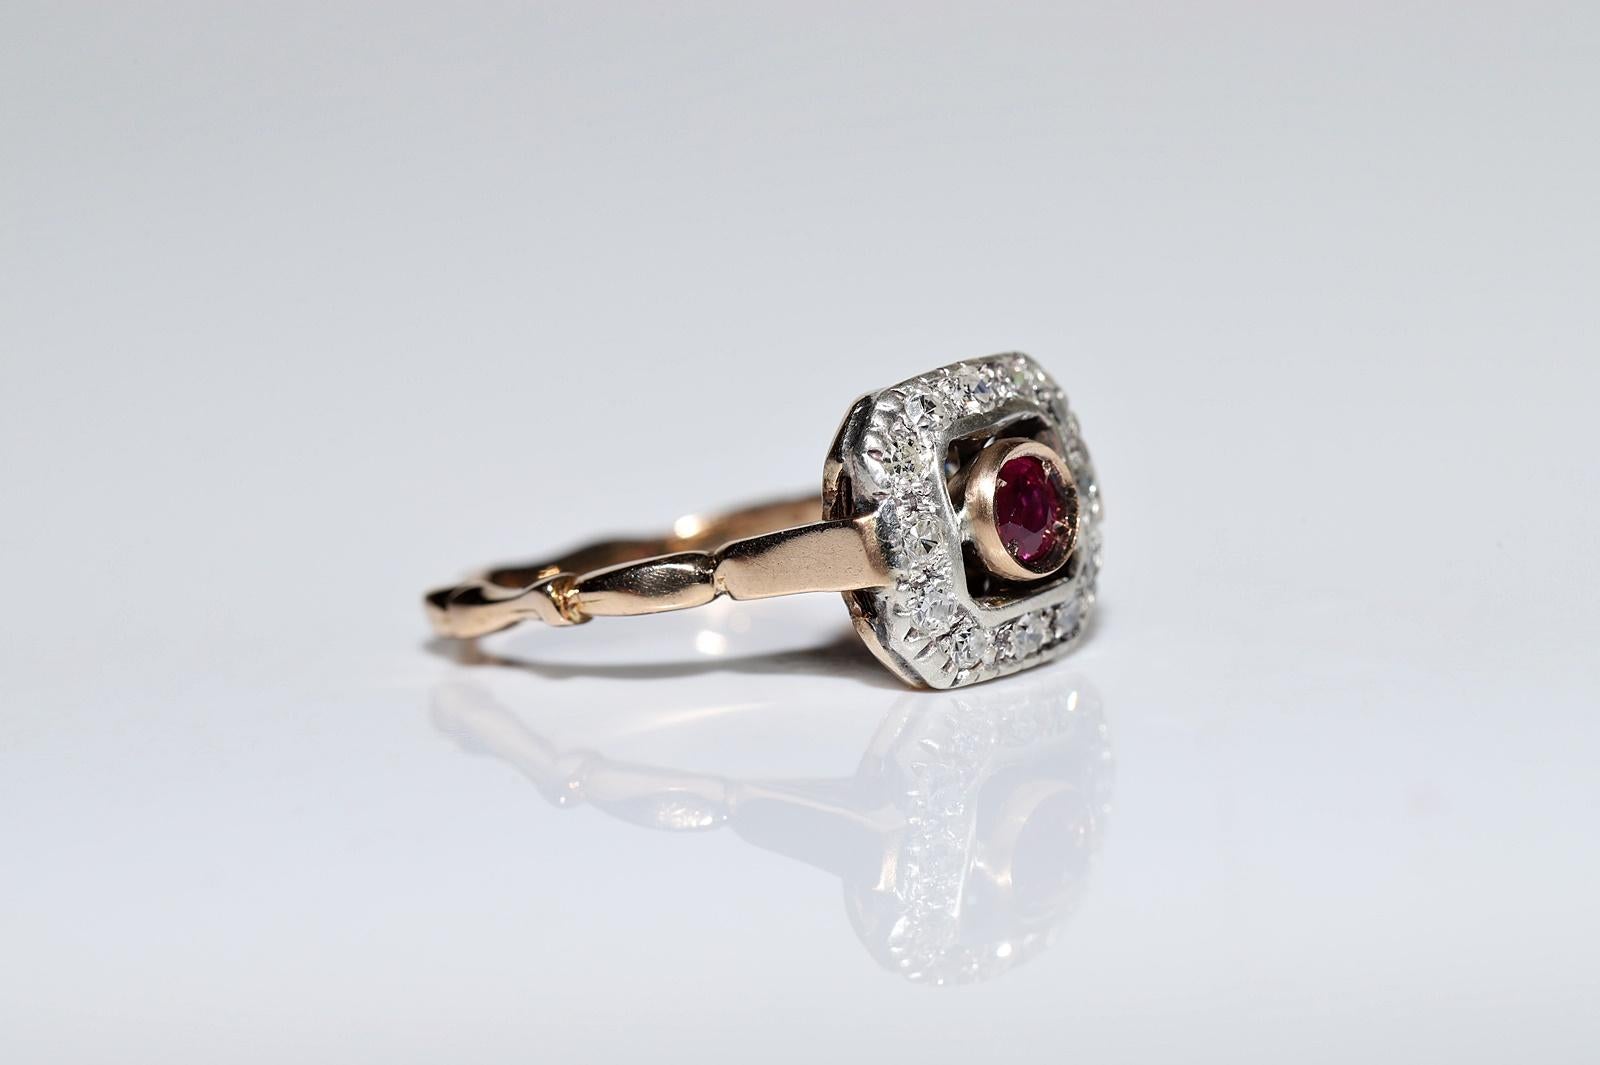 Women's Antique Circa 1900s 14k Gold Top Silver Natural Diamond And Ruby Decorated Ring For Sale